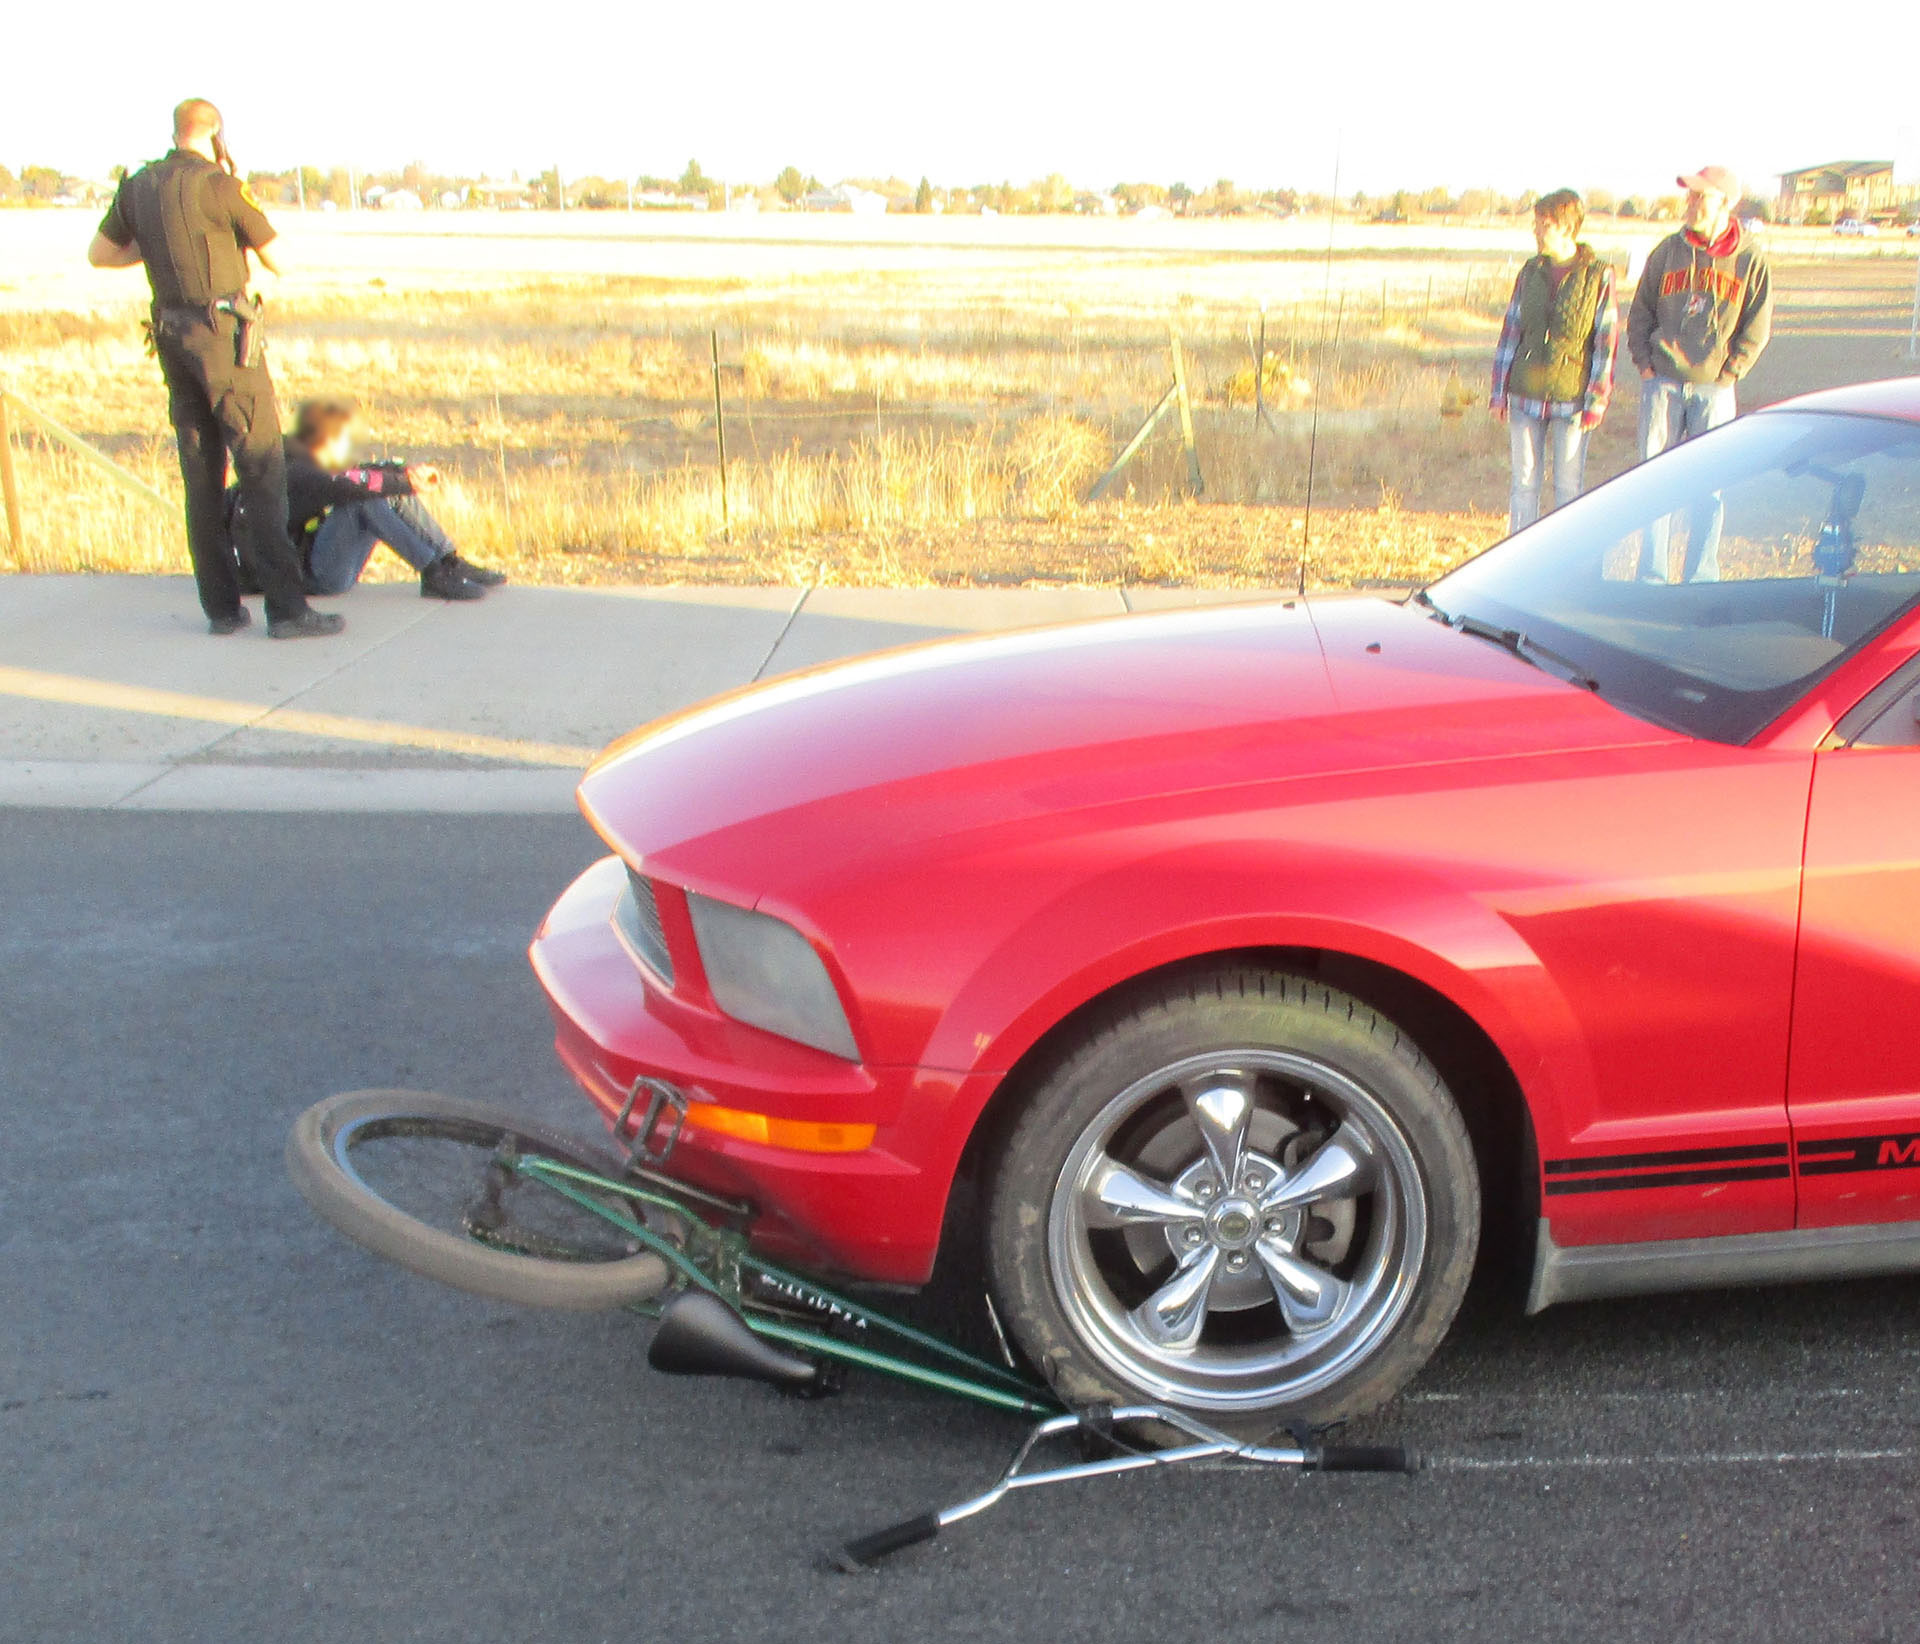 Boy on bicycle struck by car in Prescott Valley; not seriously injured - The Daily Courier